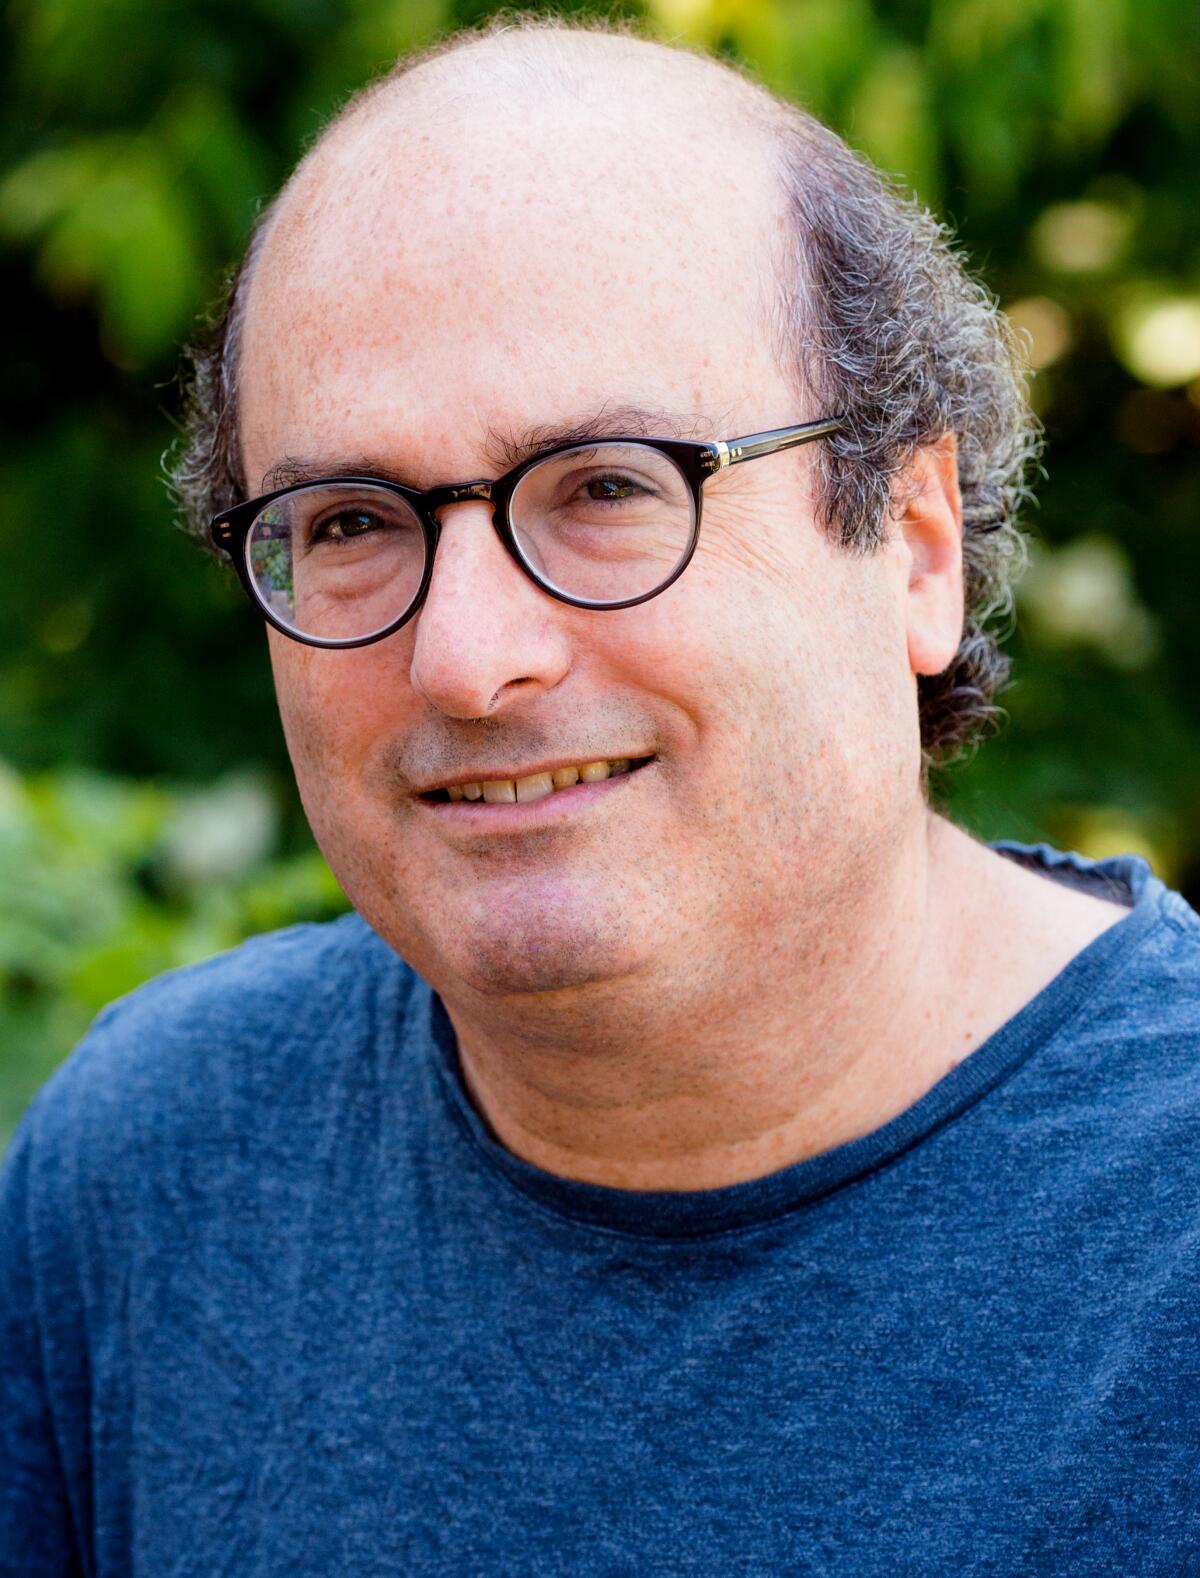 A smiling, balding man in glasses and a blue shirt